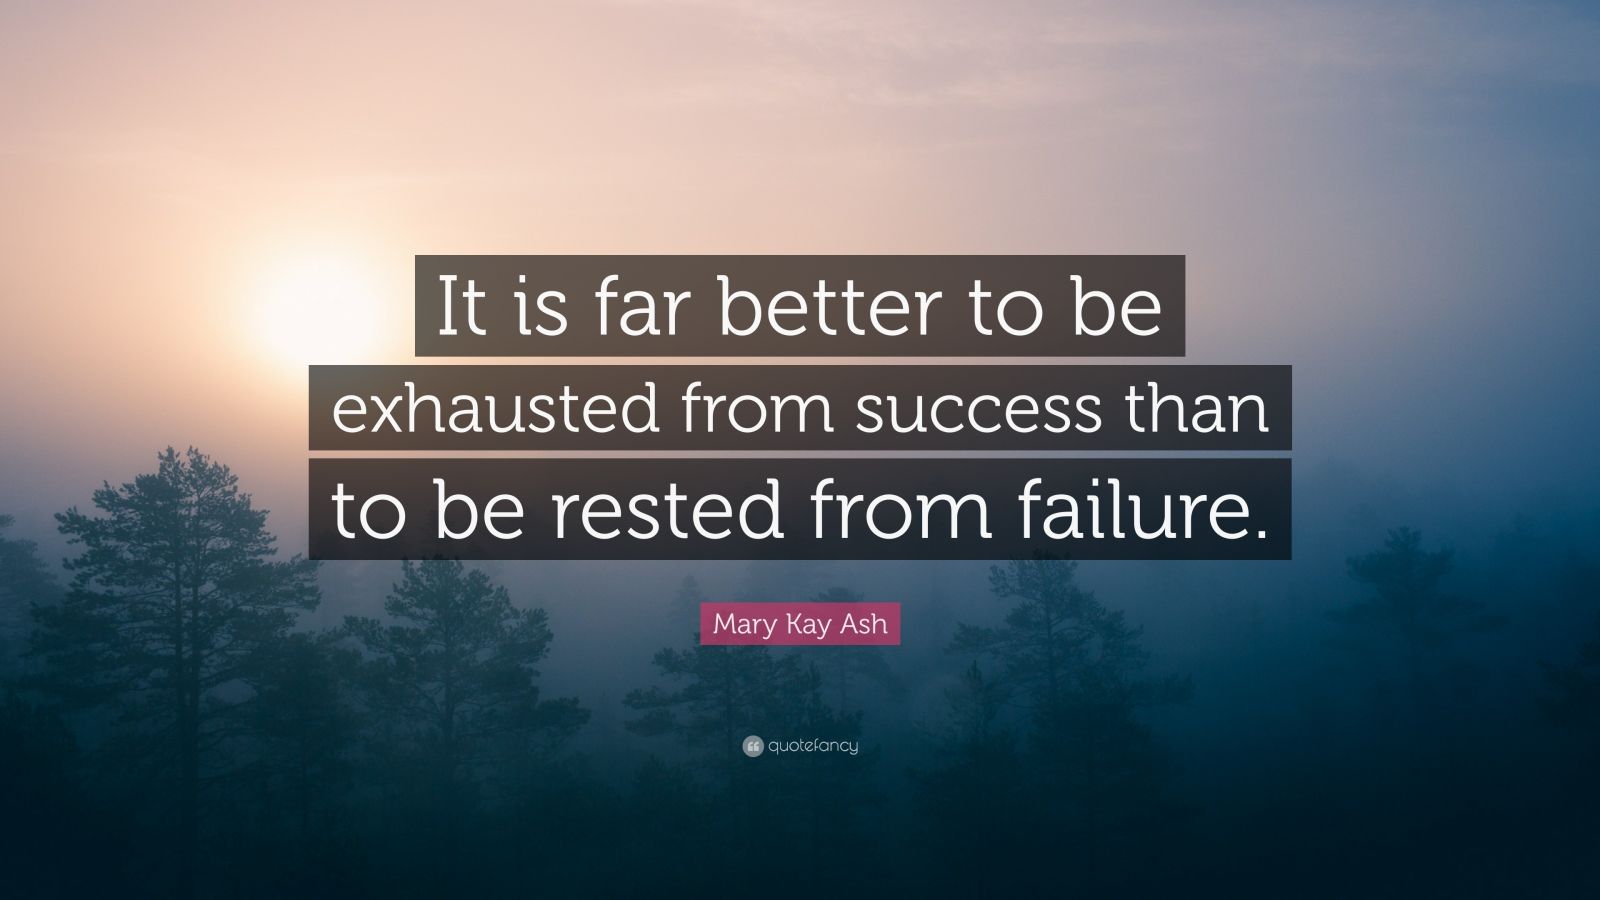 Mary Kay Ash Quote: “It is far better to be exhausted from success than